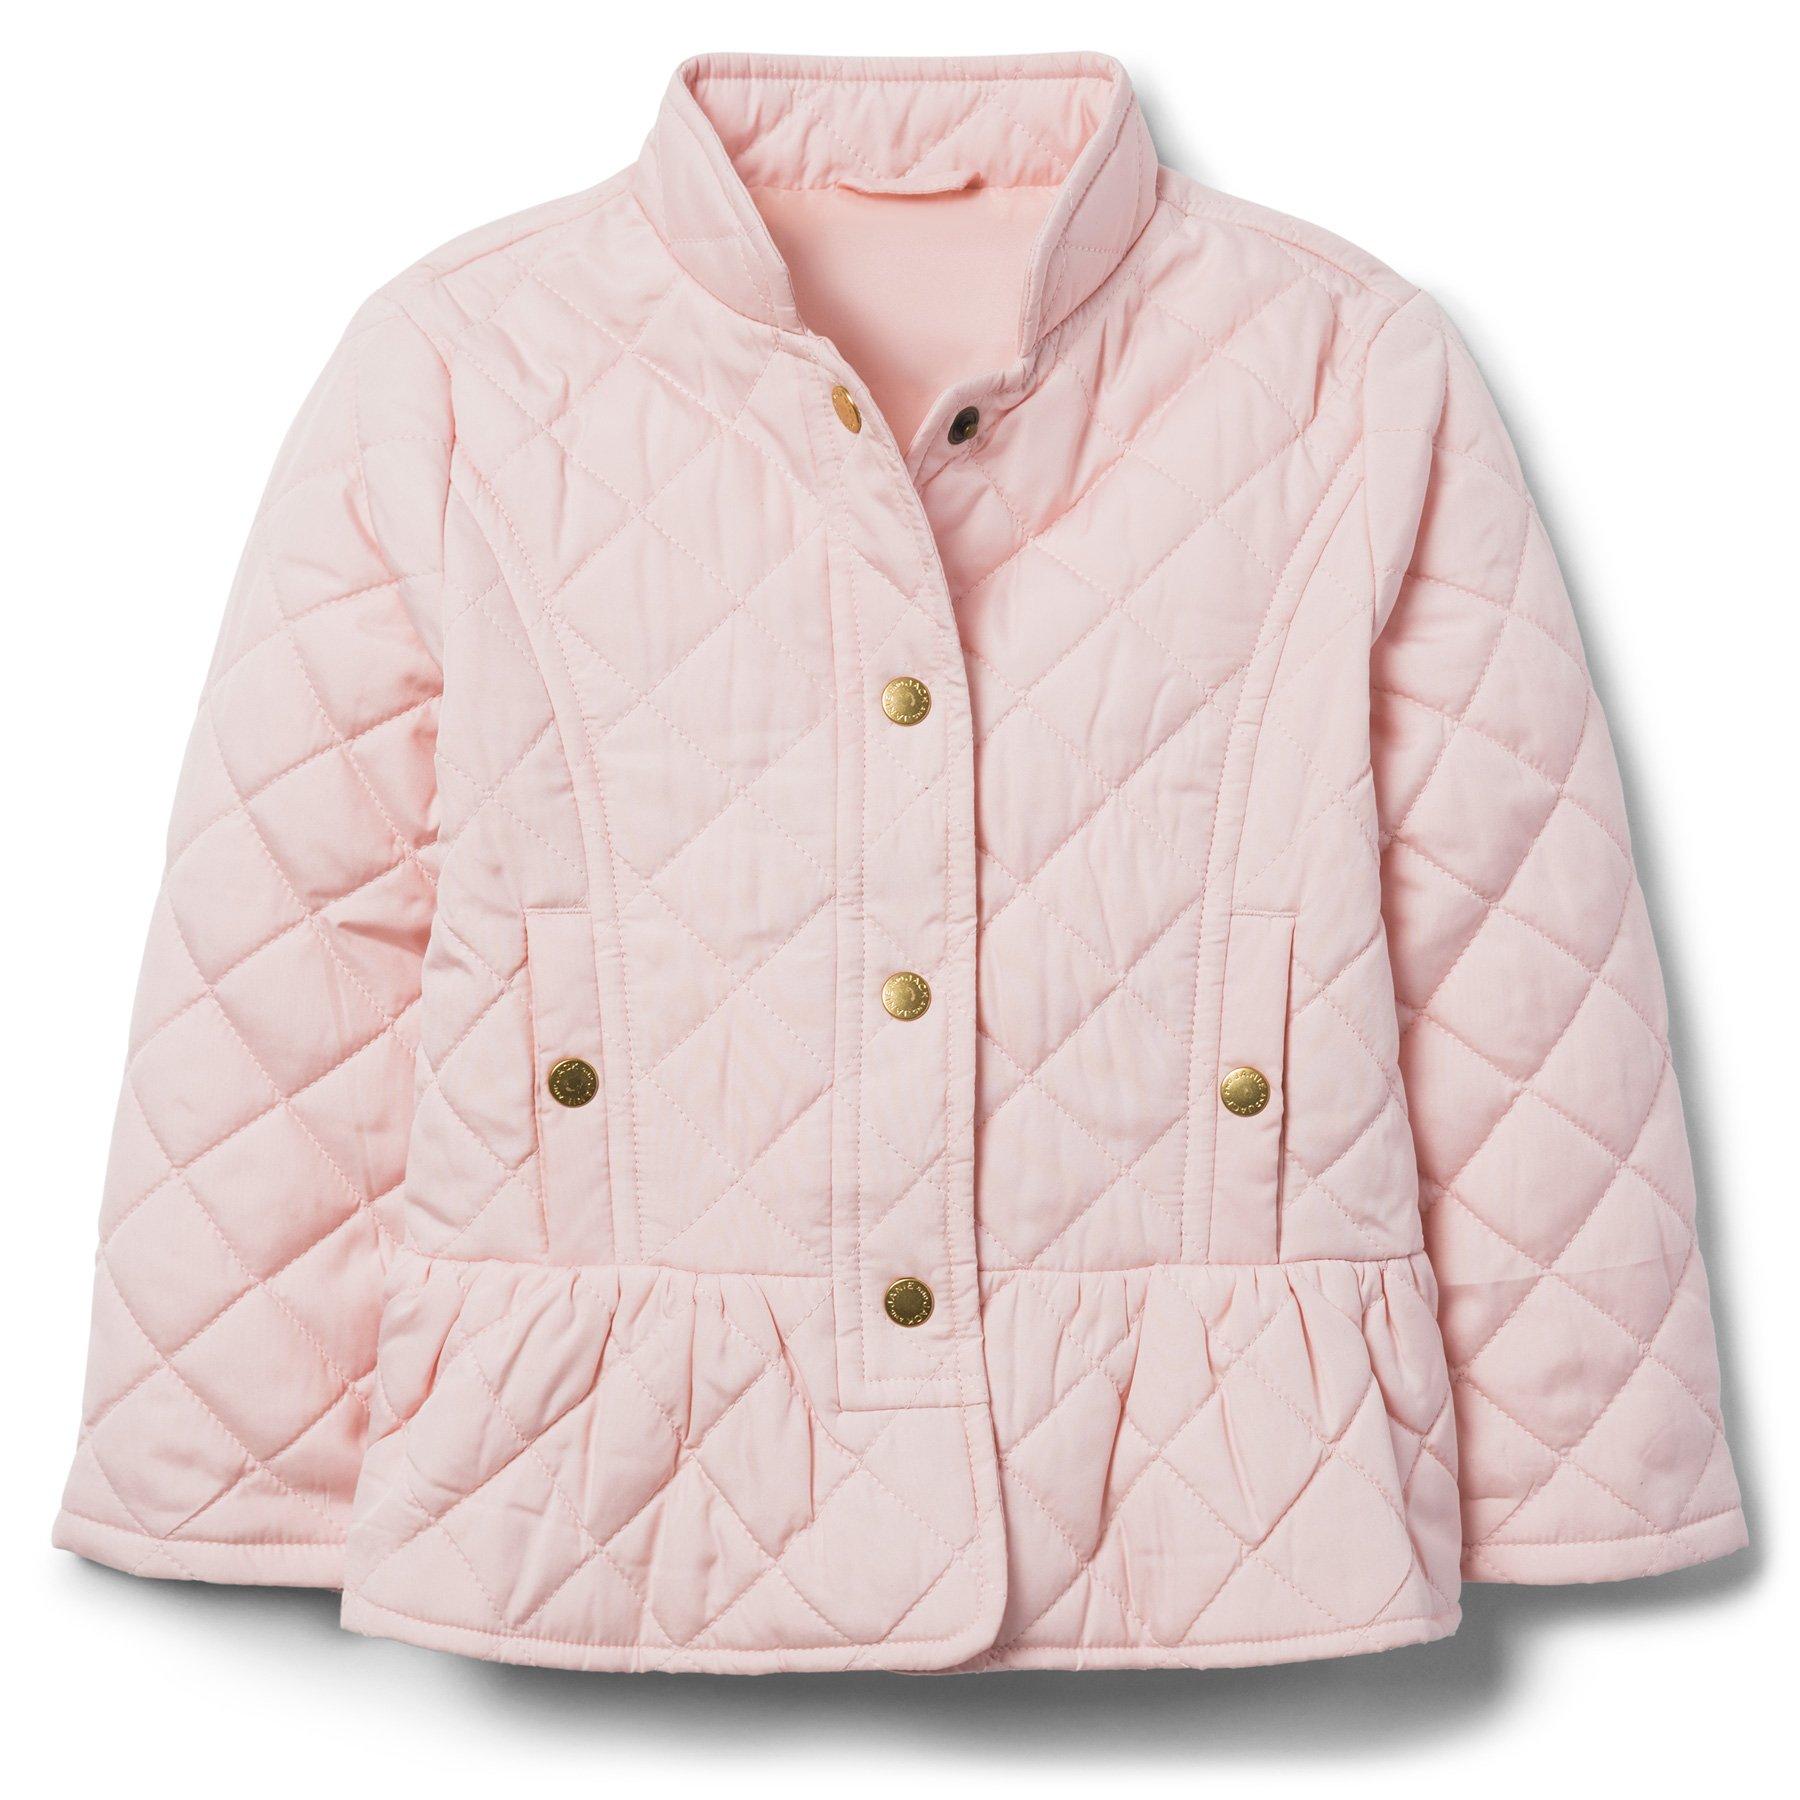 Girl Blush Quilted Peplum Jacket by Janie and Jack